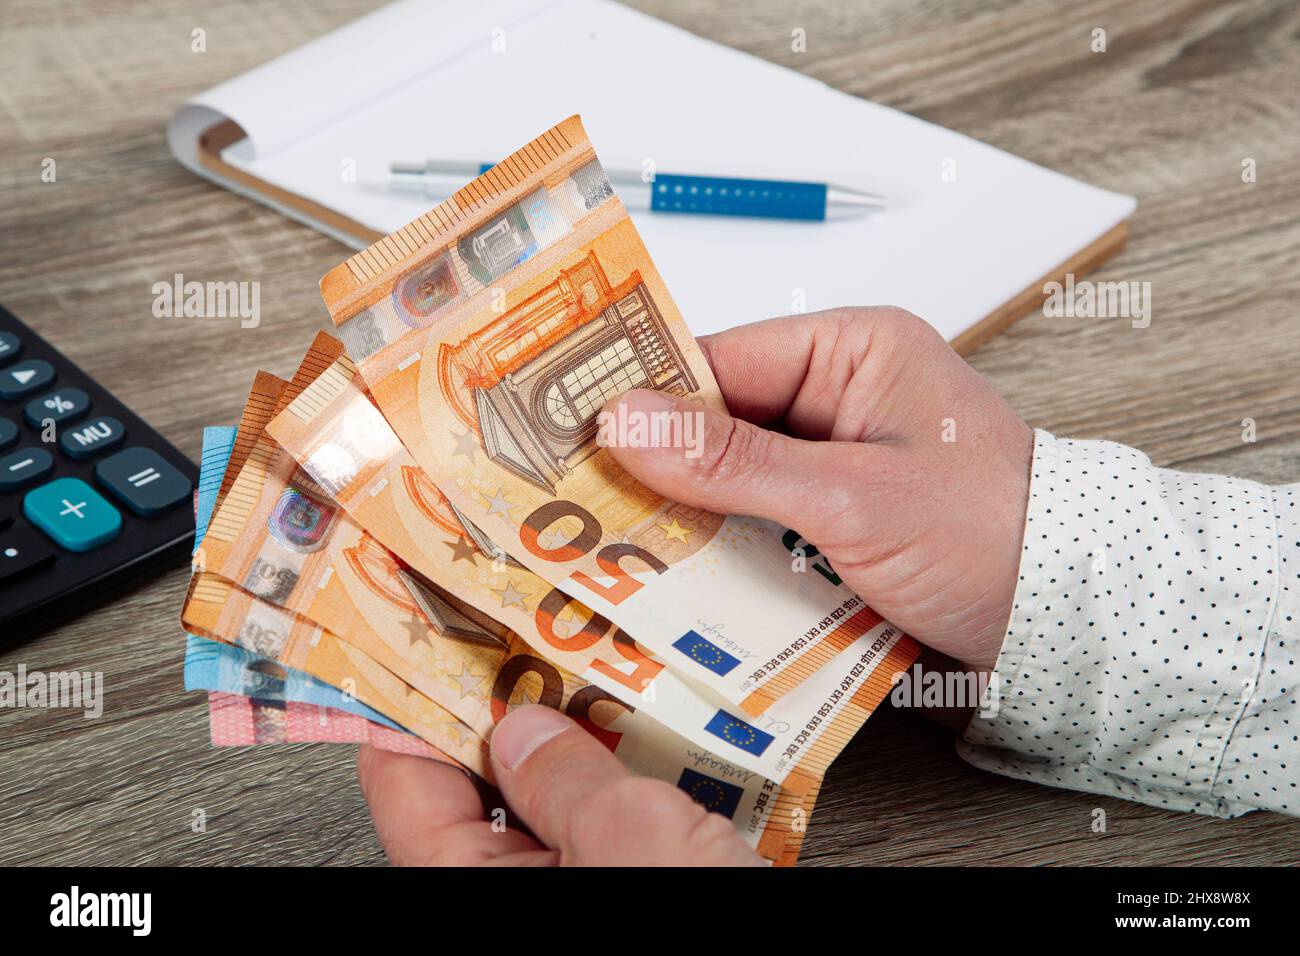 saving, finance, economy and housing concept - man hands with calculator counting money and making notes at home Stock Photo